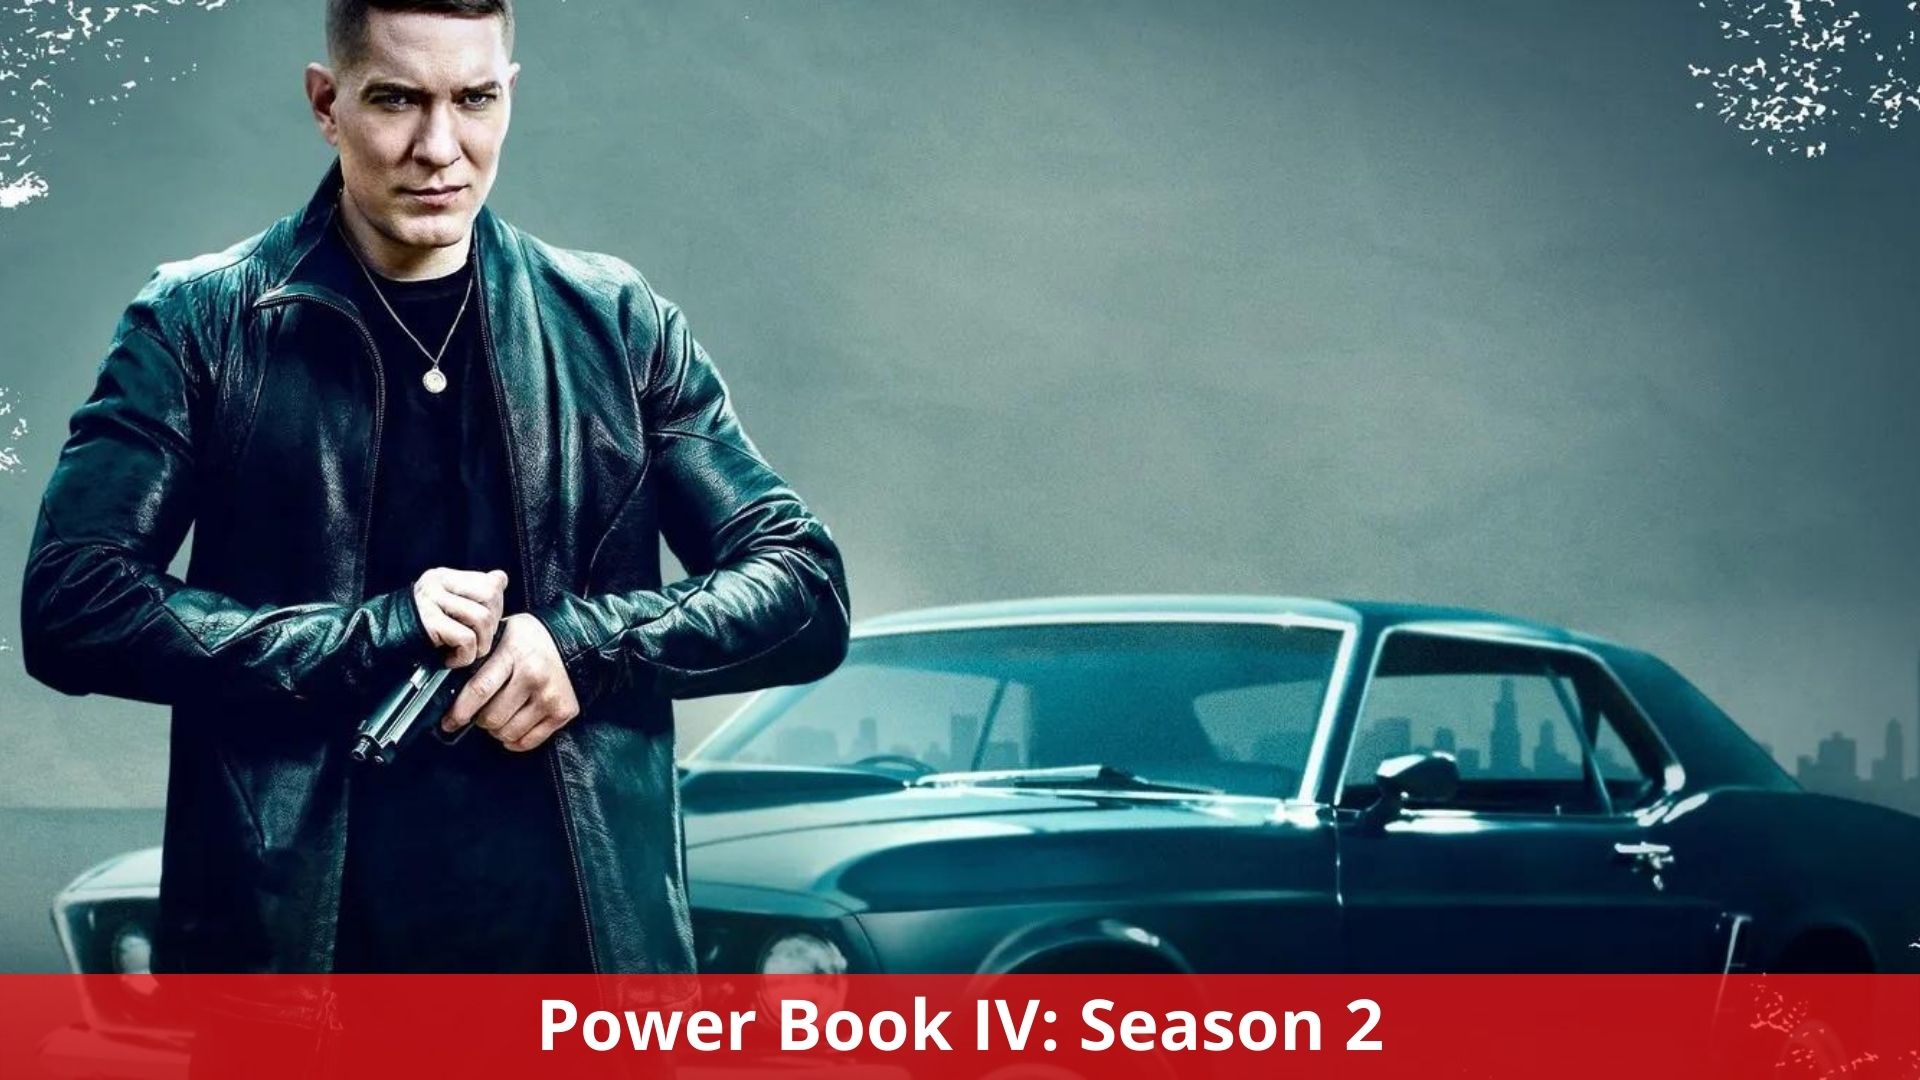 Power Book IV: Season 2 - Joseph Sikora Of The Force Discusses The "Huge Loss"